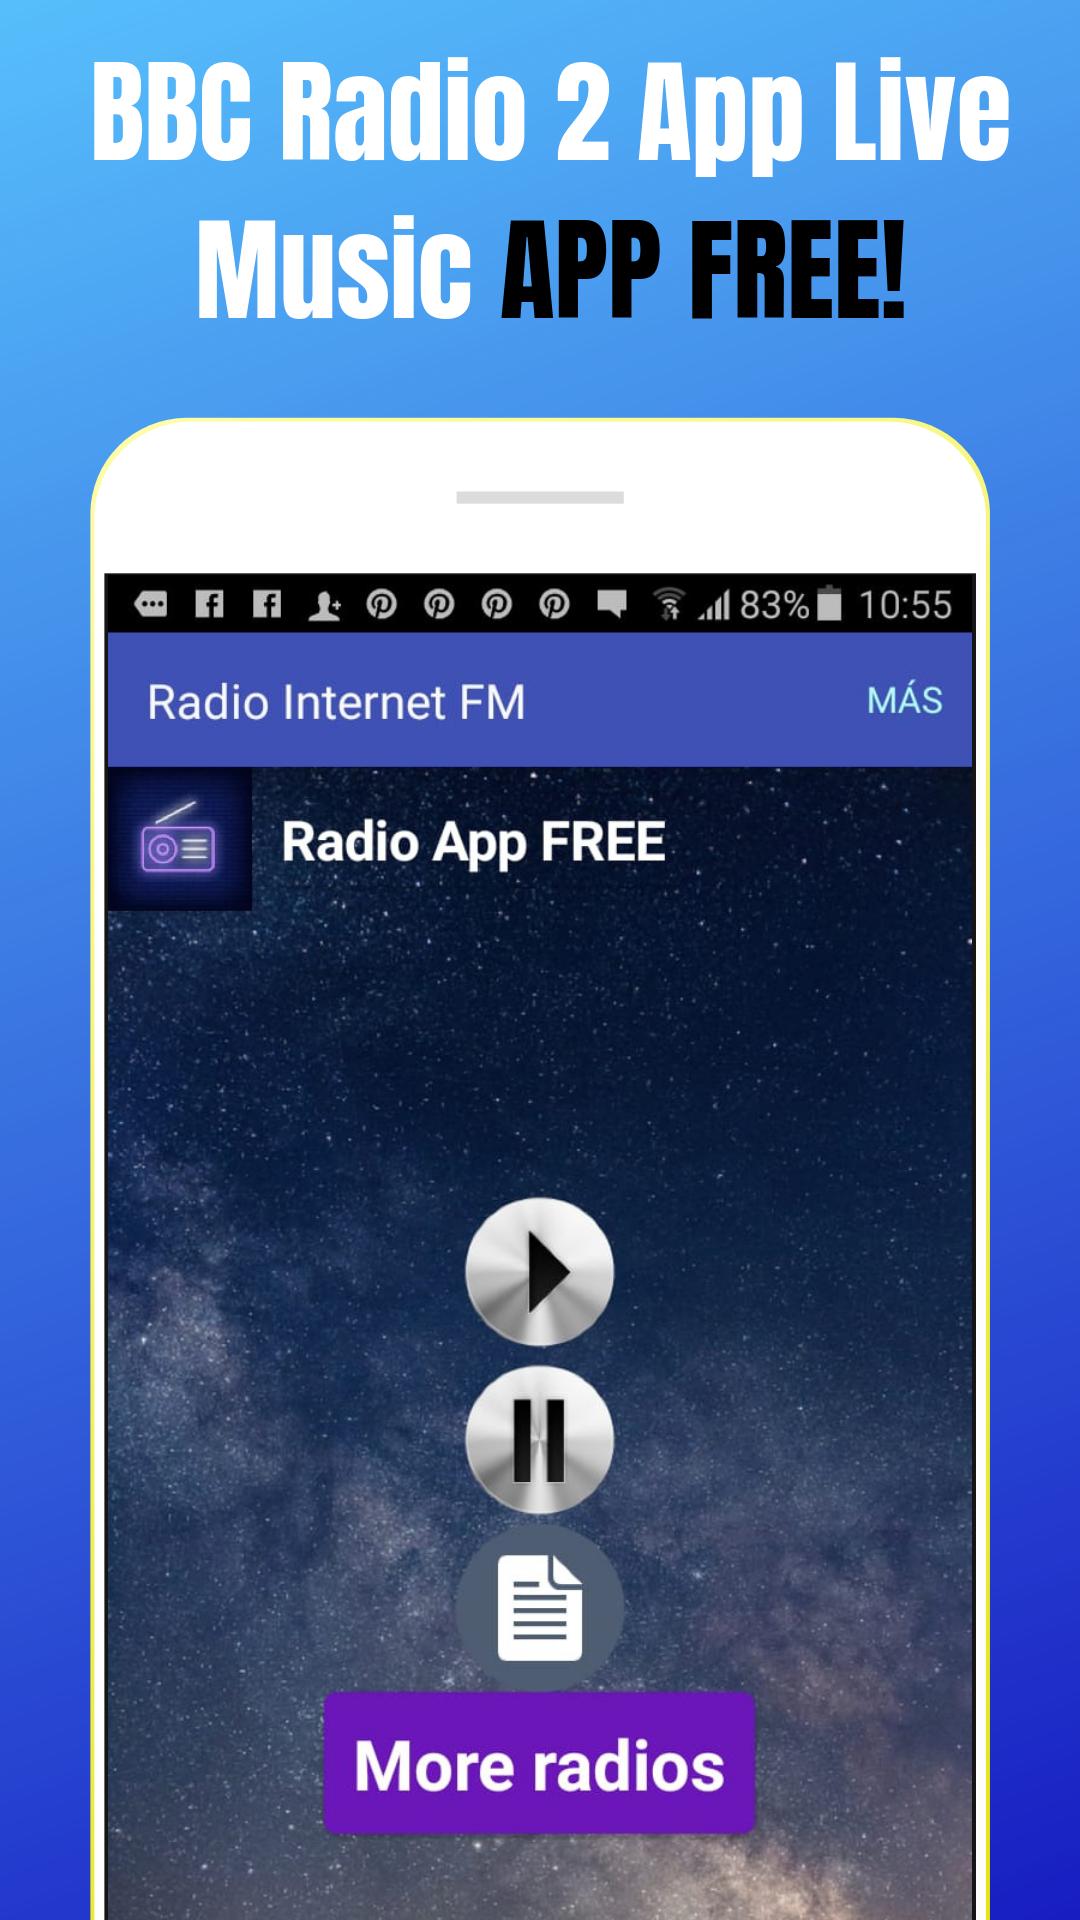 BBC Radio 2 App Live Music Player Free Online UK for Android - APK Download